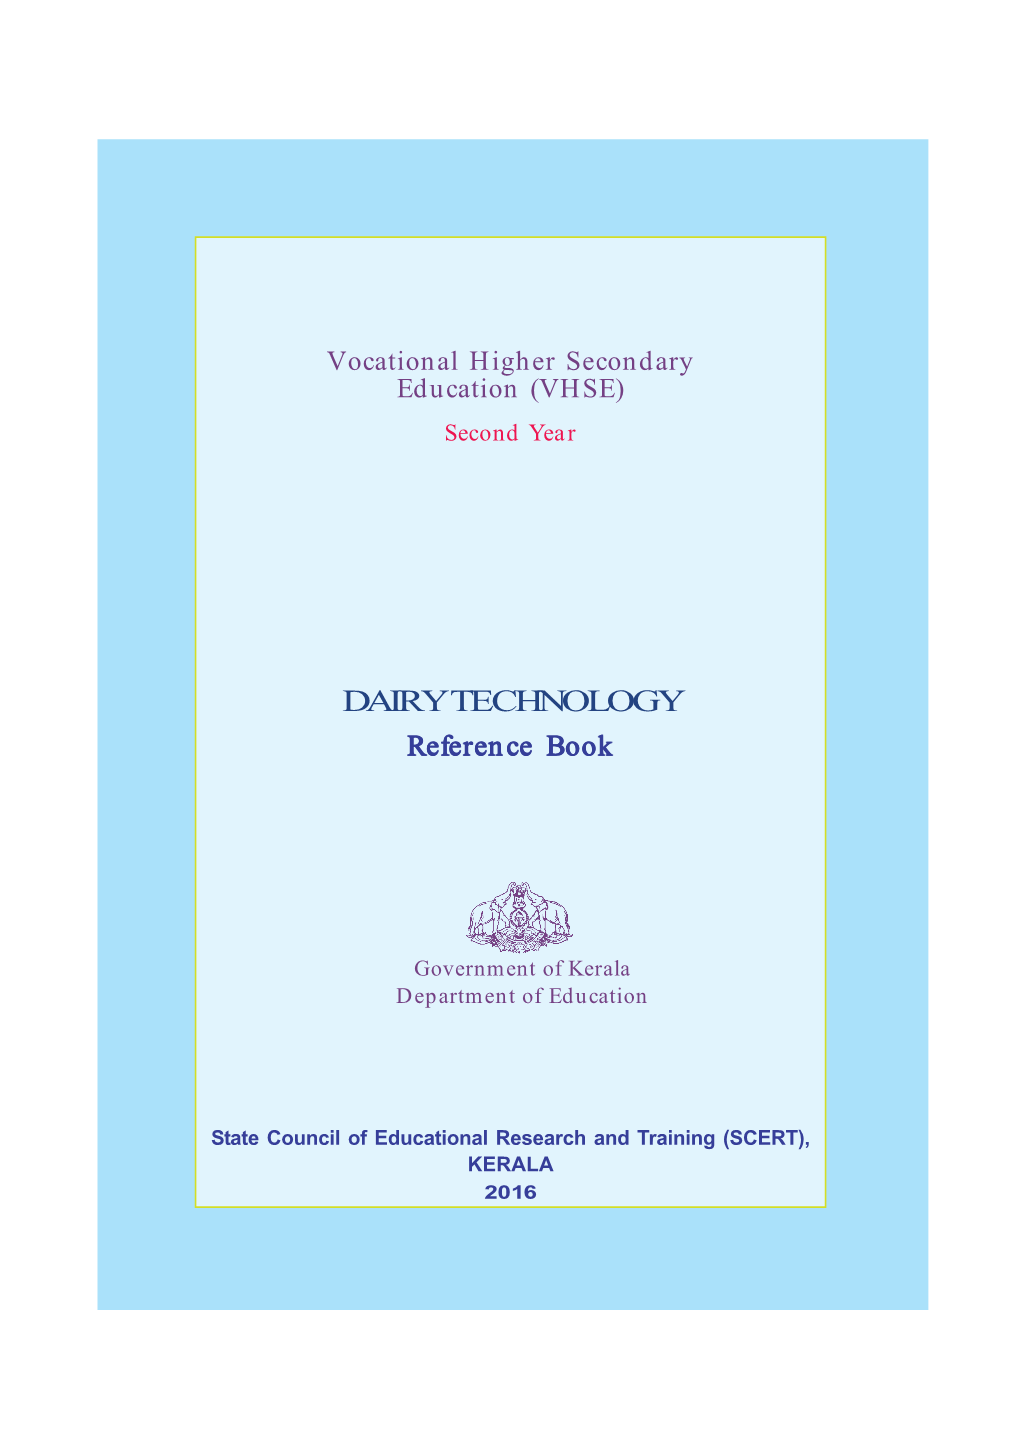 DAIRY TECHNOLOGY Reference Book